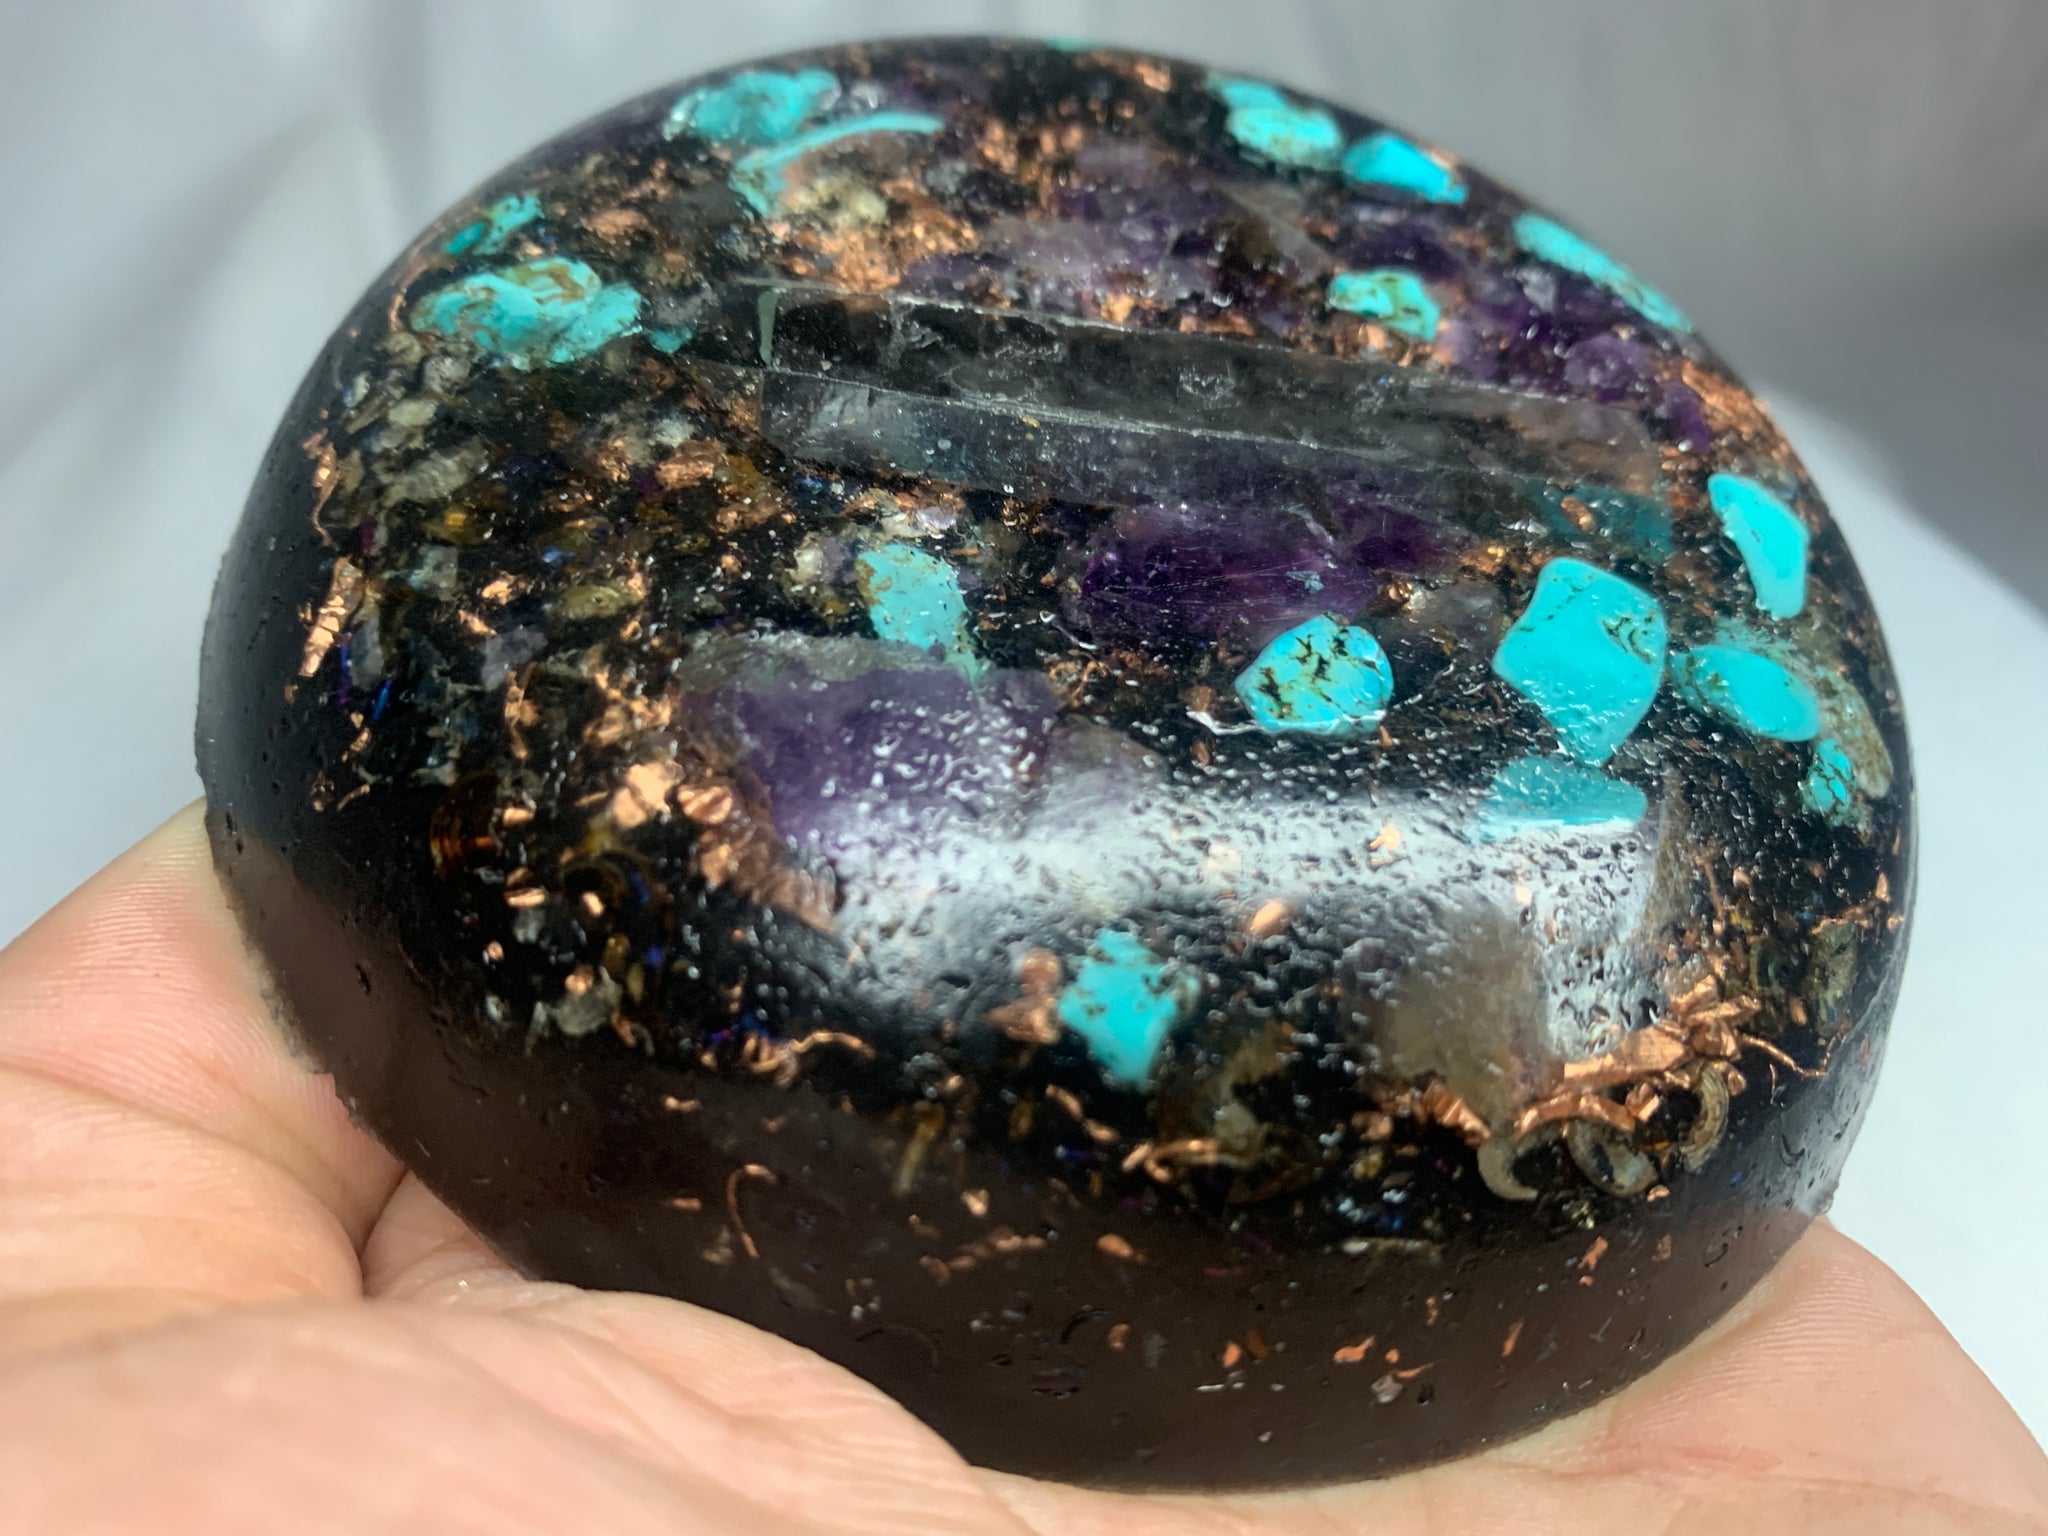 1 custom made Turquoise Orgone HHG unit for home or office emf protection decoration or travel